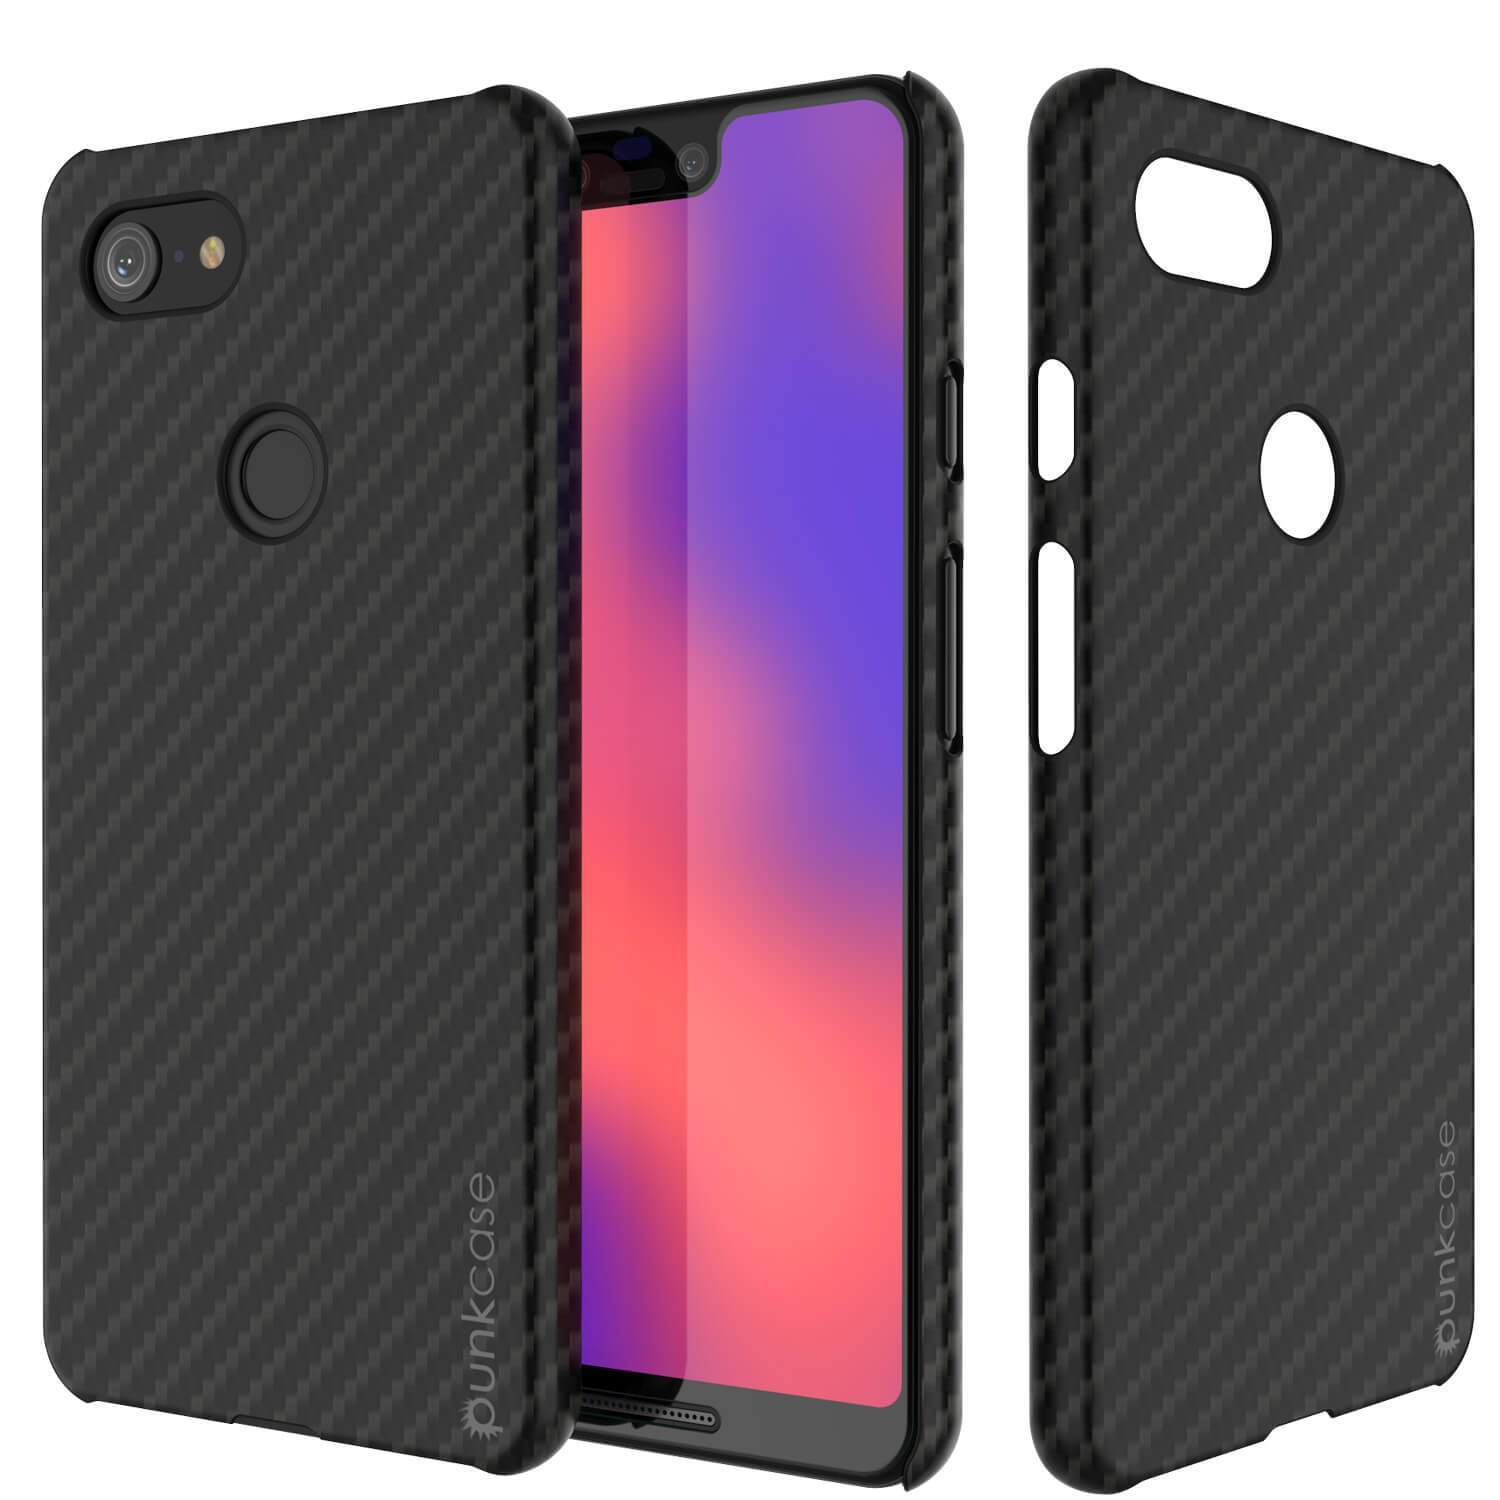 Google Pixel 4 XL CarbonShield Heavy Duty & Ultra Thin Leather Cover